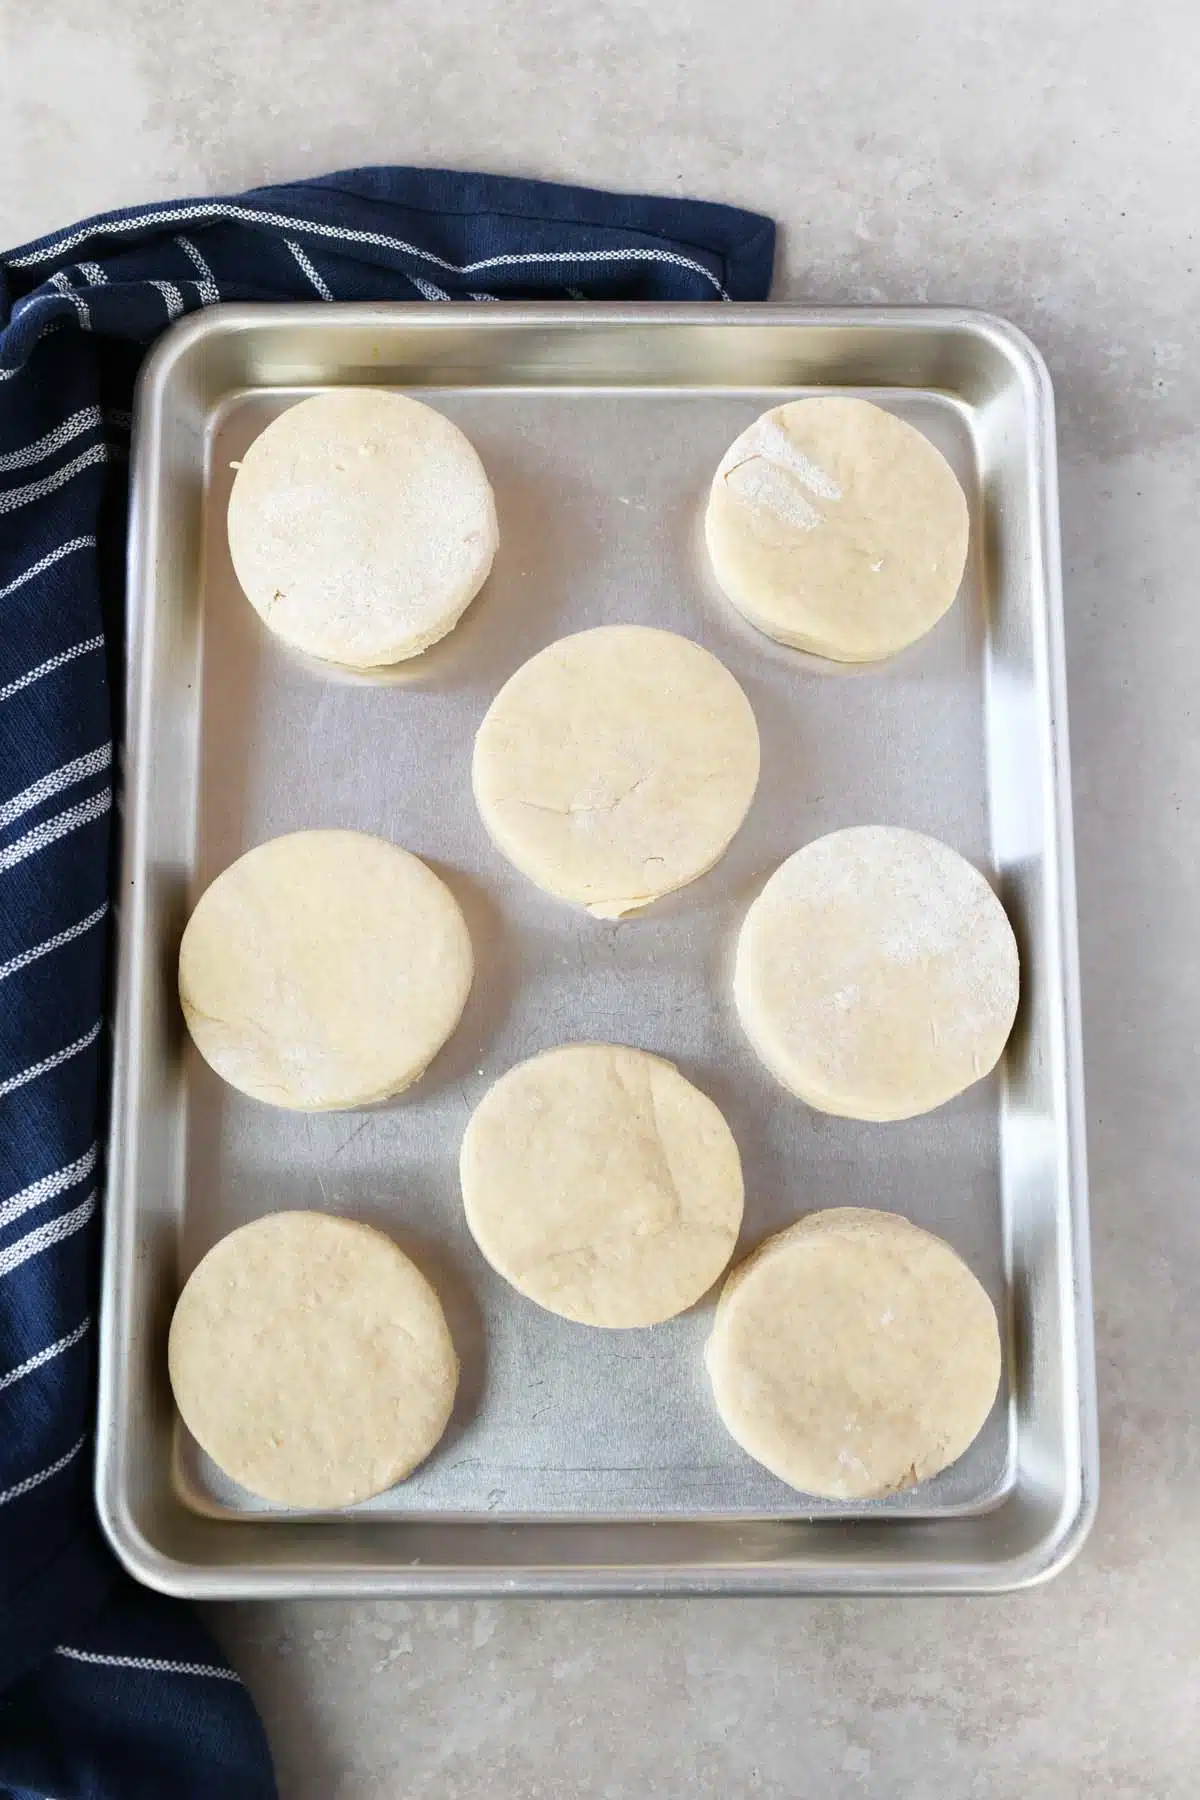 Biscuit dough circles on a stainless steel baking tray.